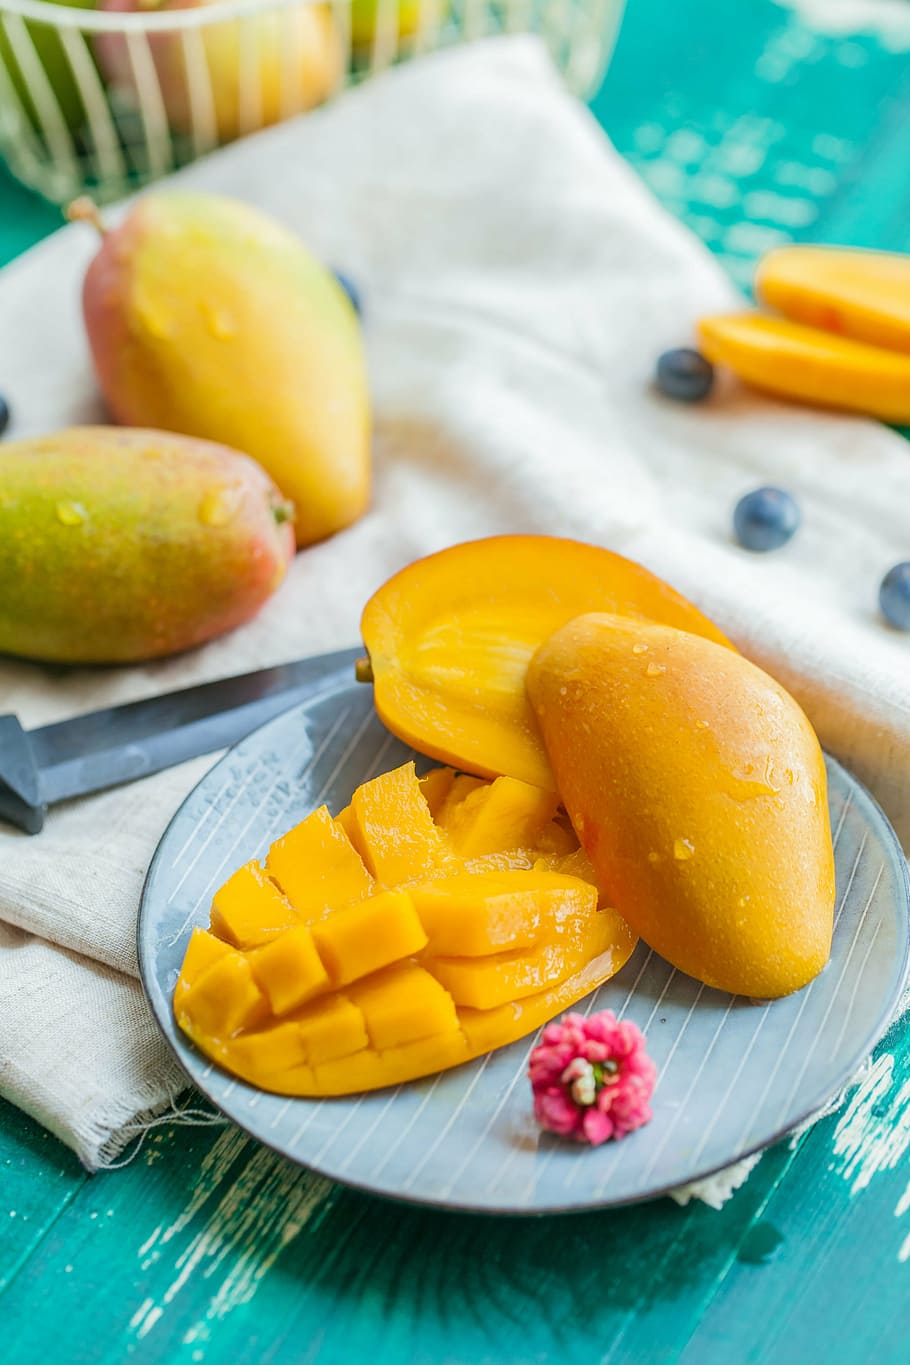 mangoes, round, striped, plate, chaise mans, mango, hainan, sanya, fruit, food and drink